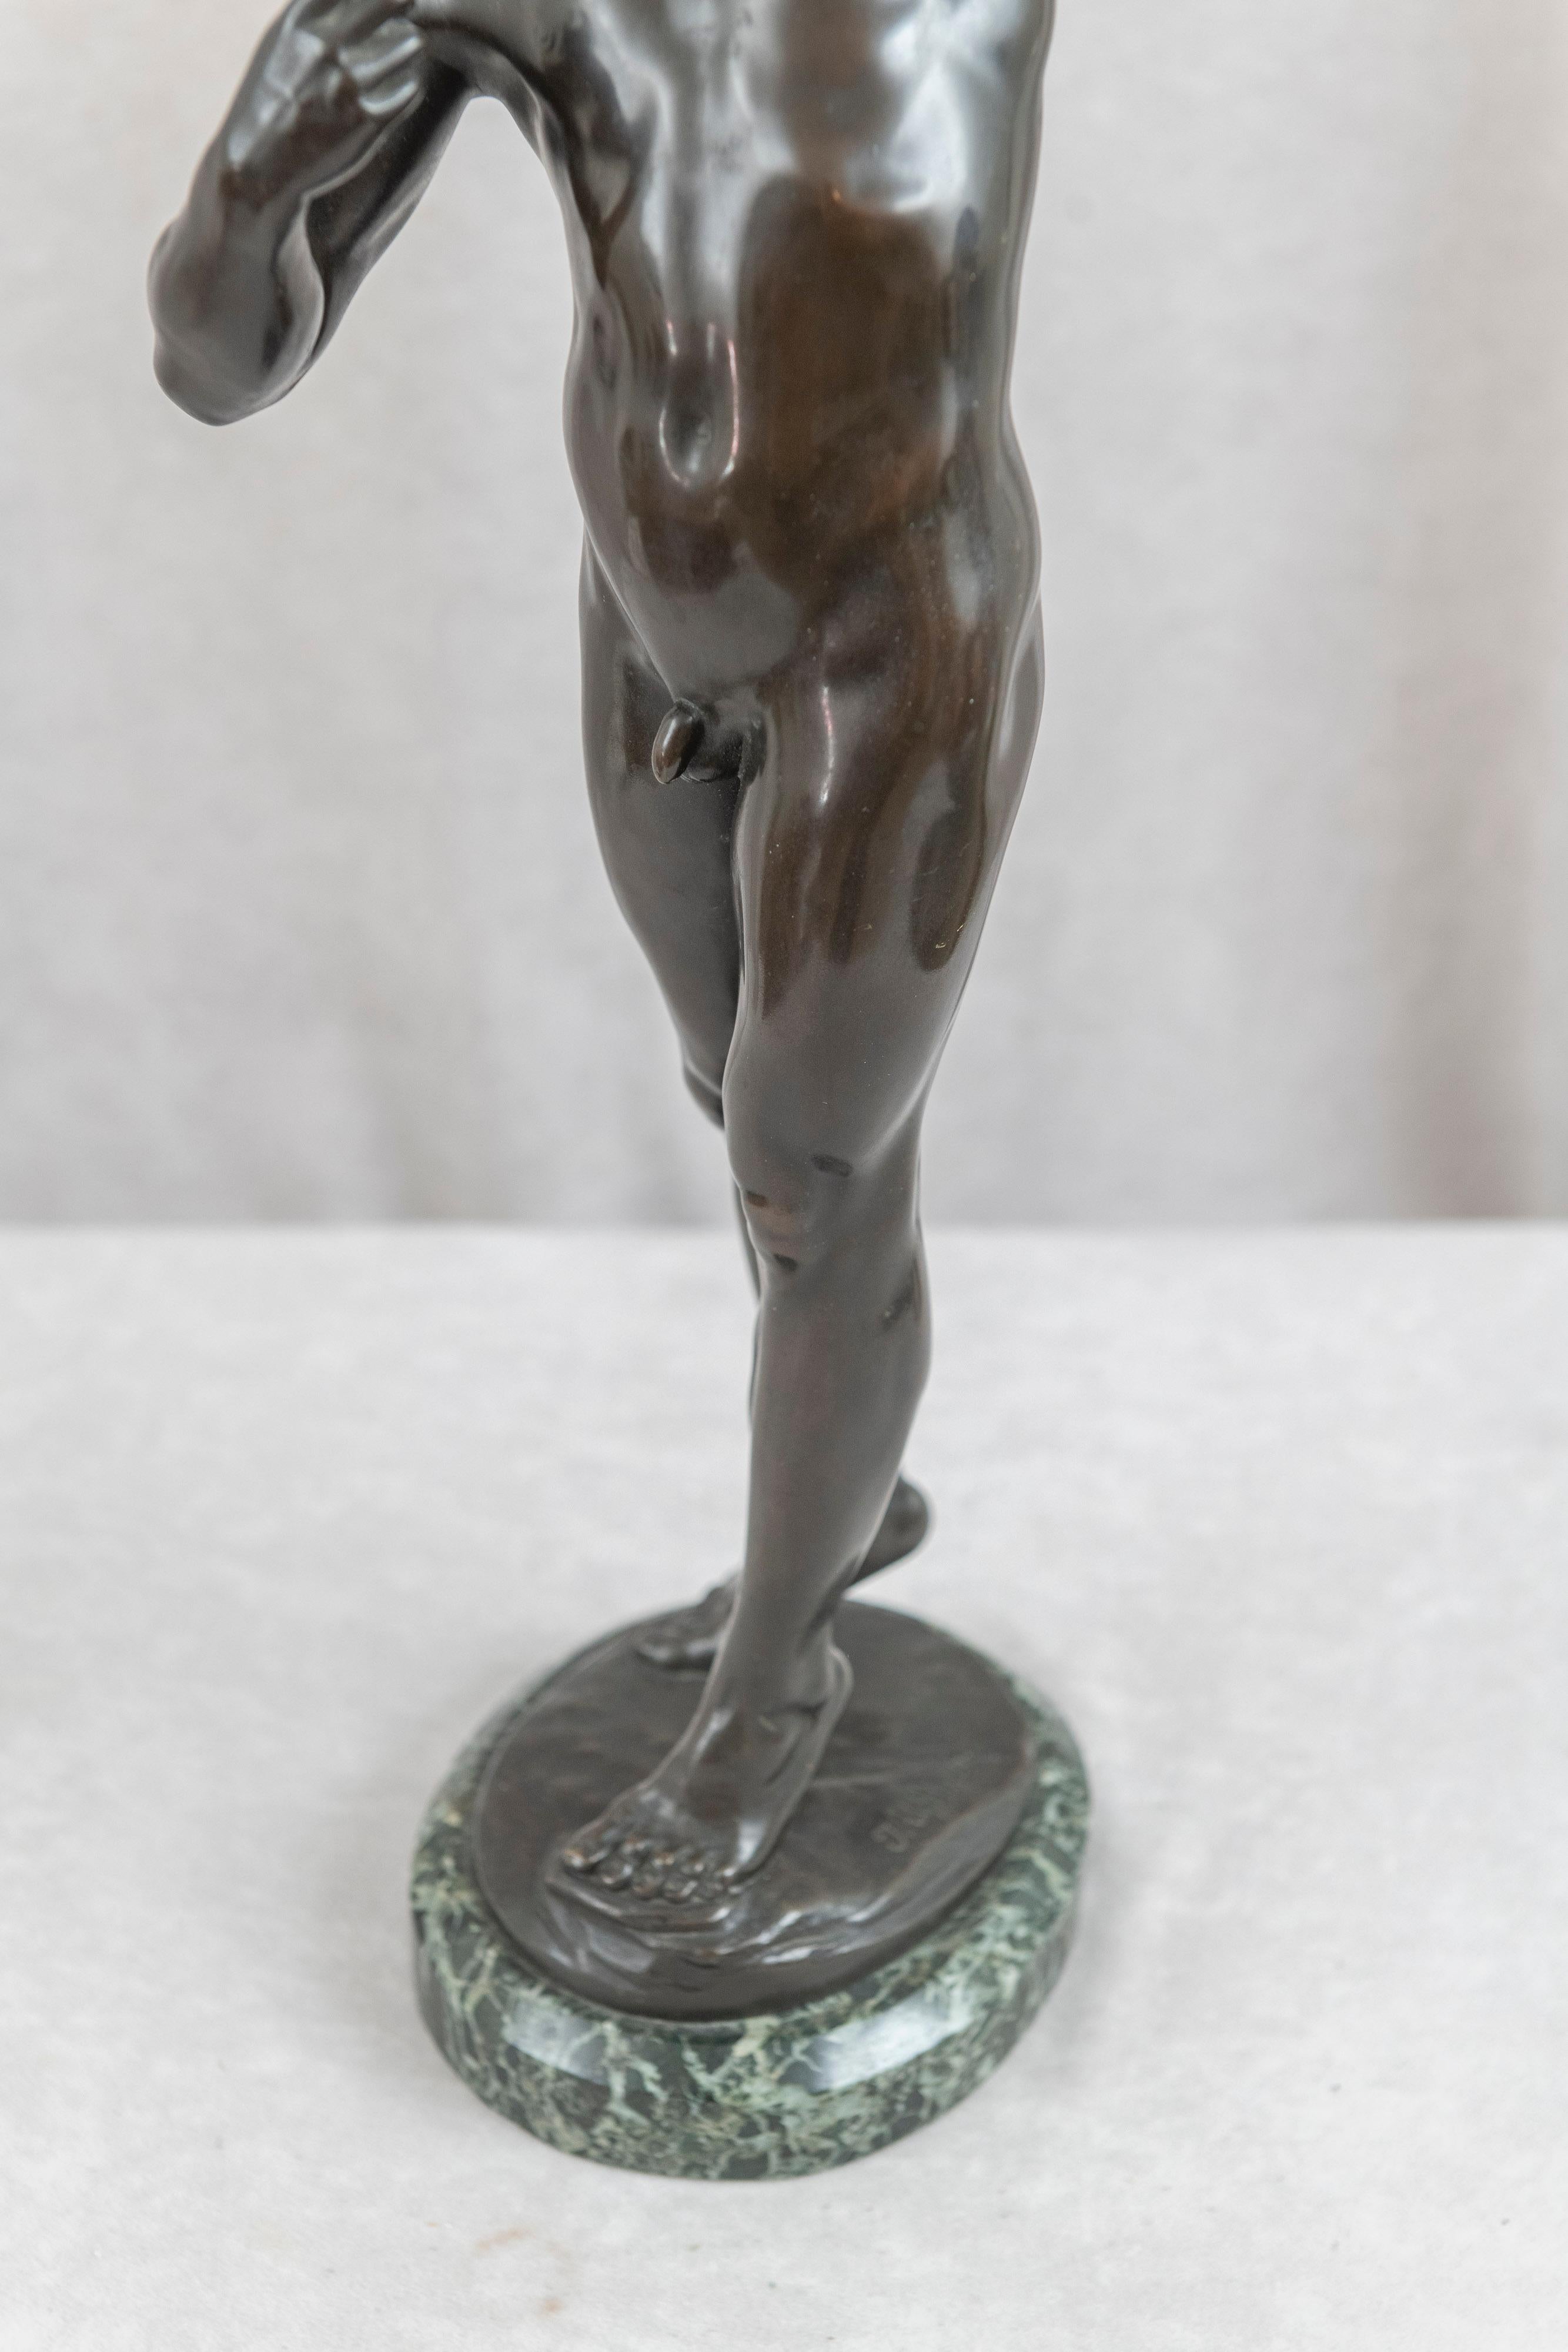 Large German Bronze, Male Nude Archer, J. Uphues 1850-1911, Gladenbeck Foundry 3